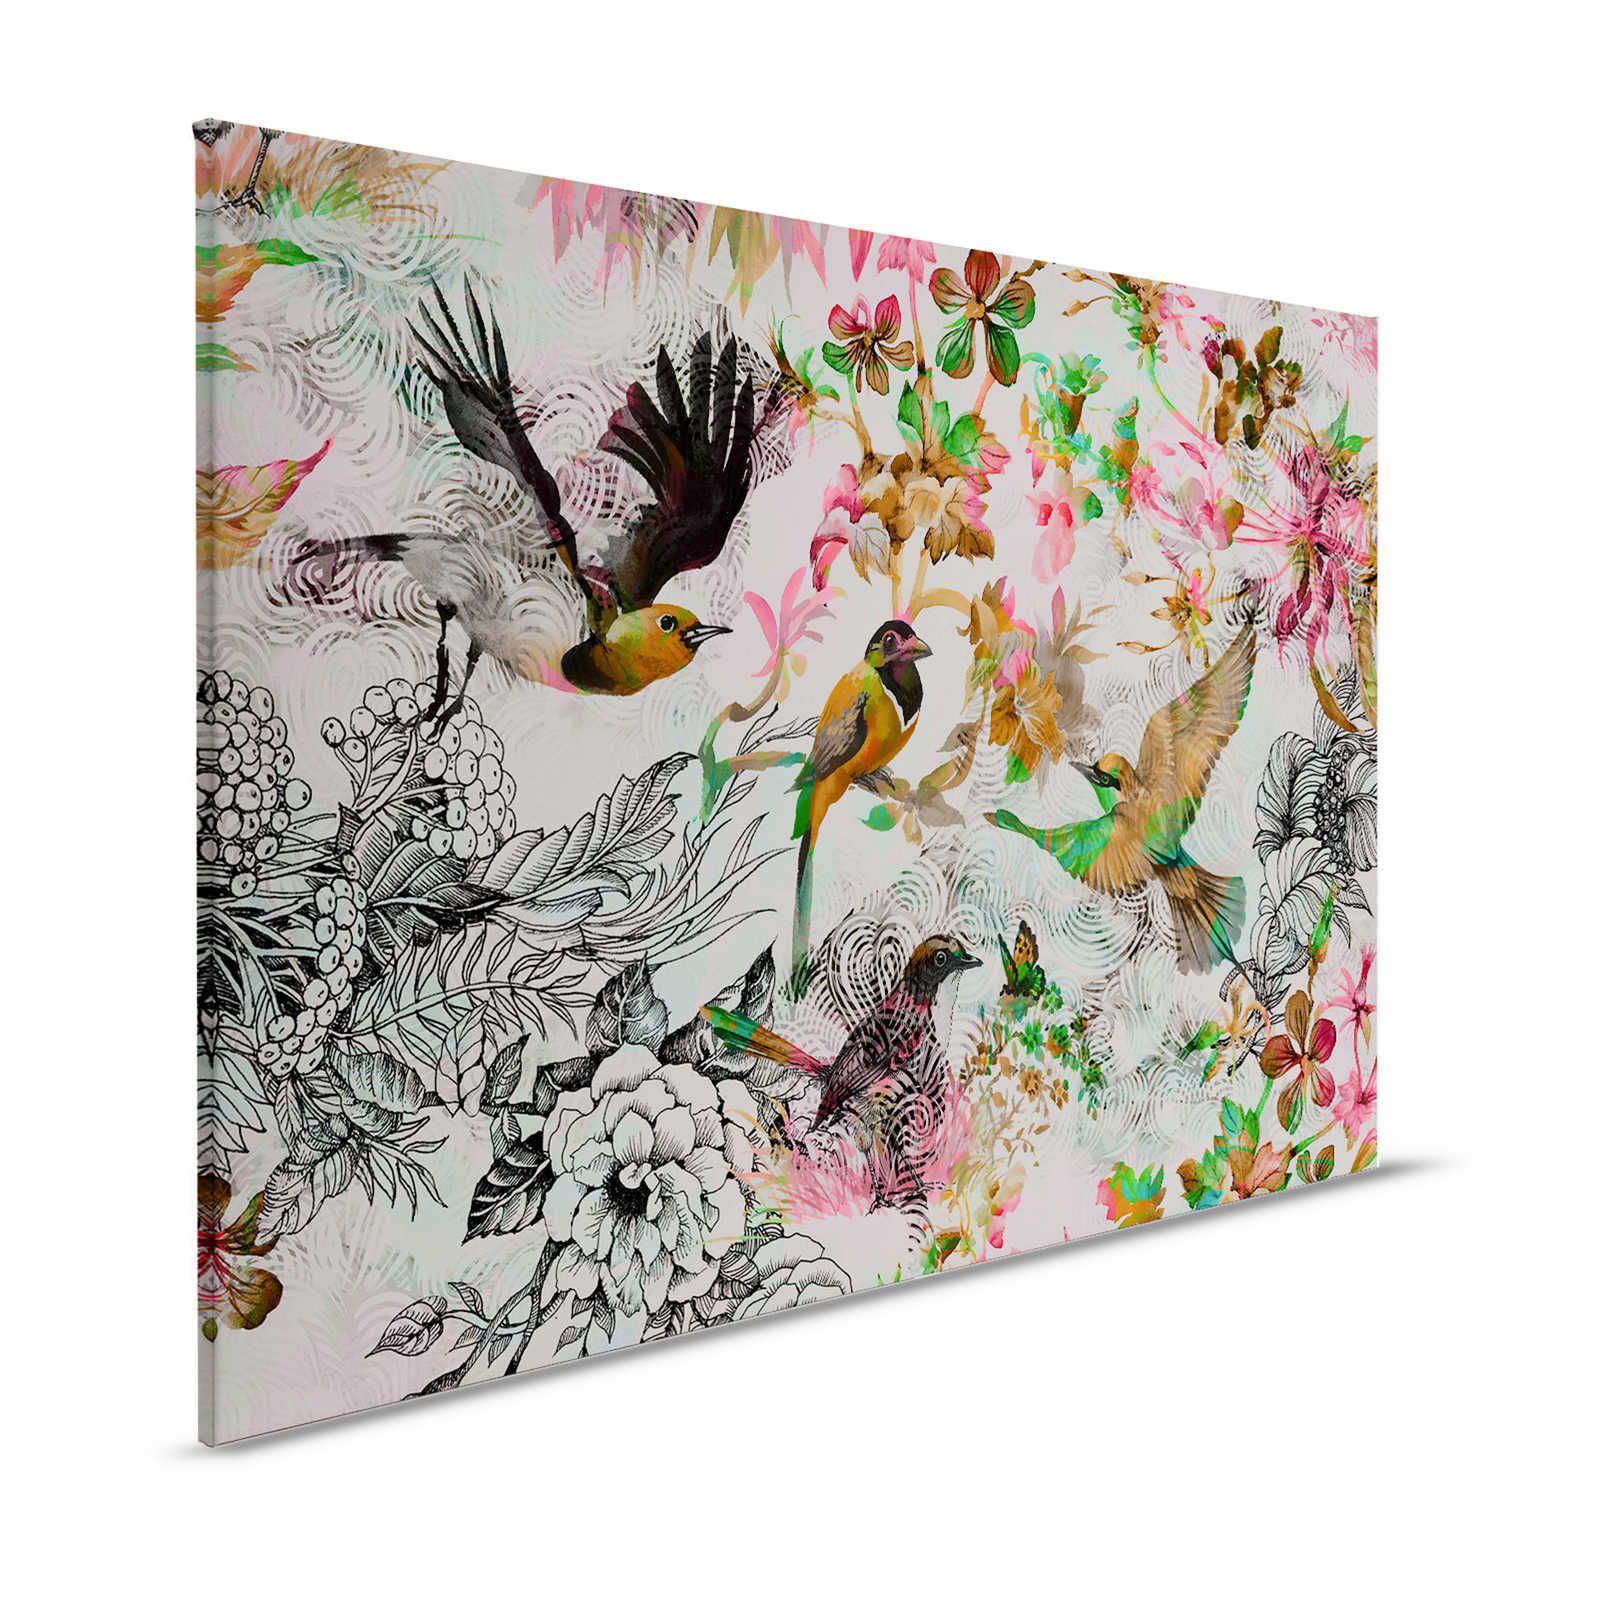 Canvas painting Birds & Flowers Collage Style - 1.20 m x 0.80 m
